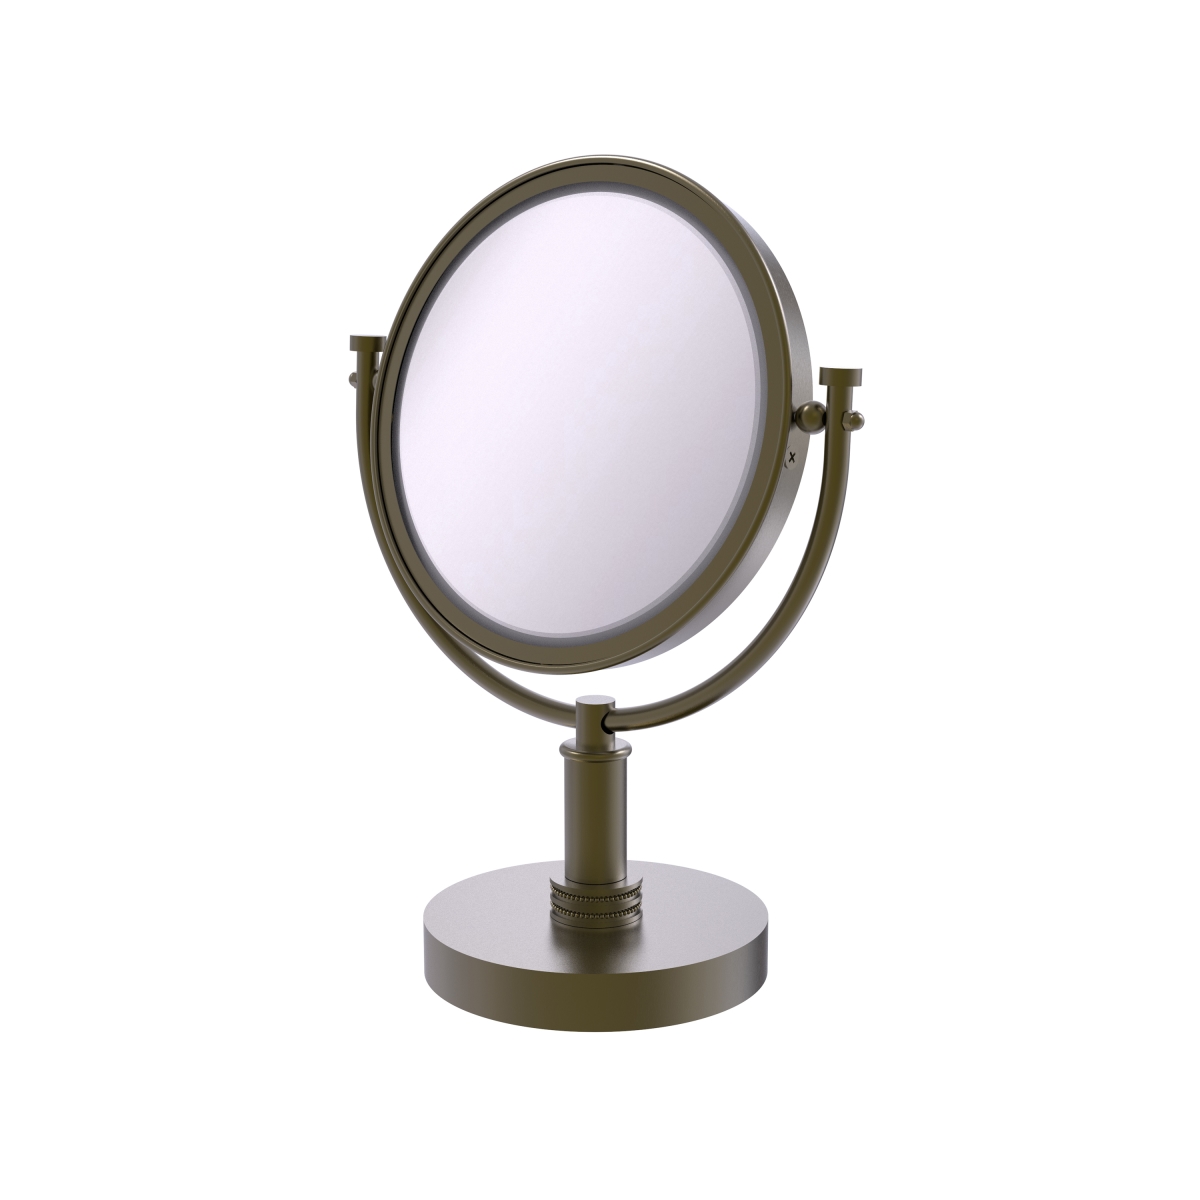 Picture of Allied Brass DM-4D-5X-ABR 8 in. Vanity Top Make-Up Mirror 5X Magnification, Antique Brass - 15 x 8 x 8 in.